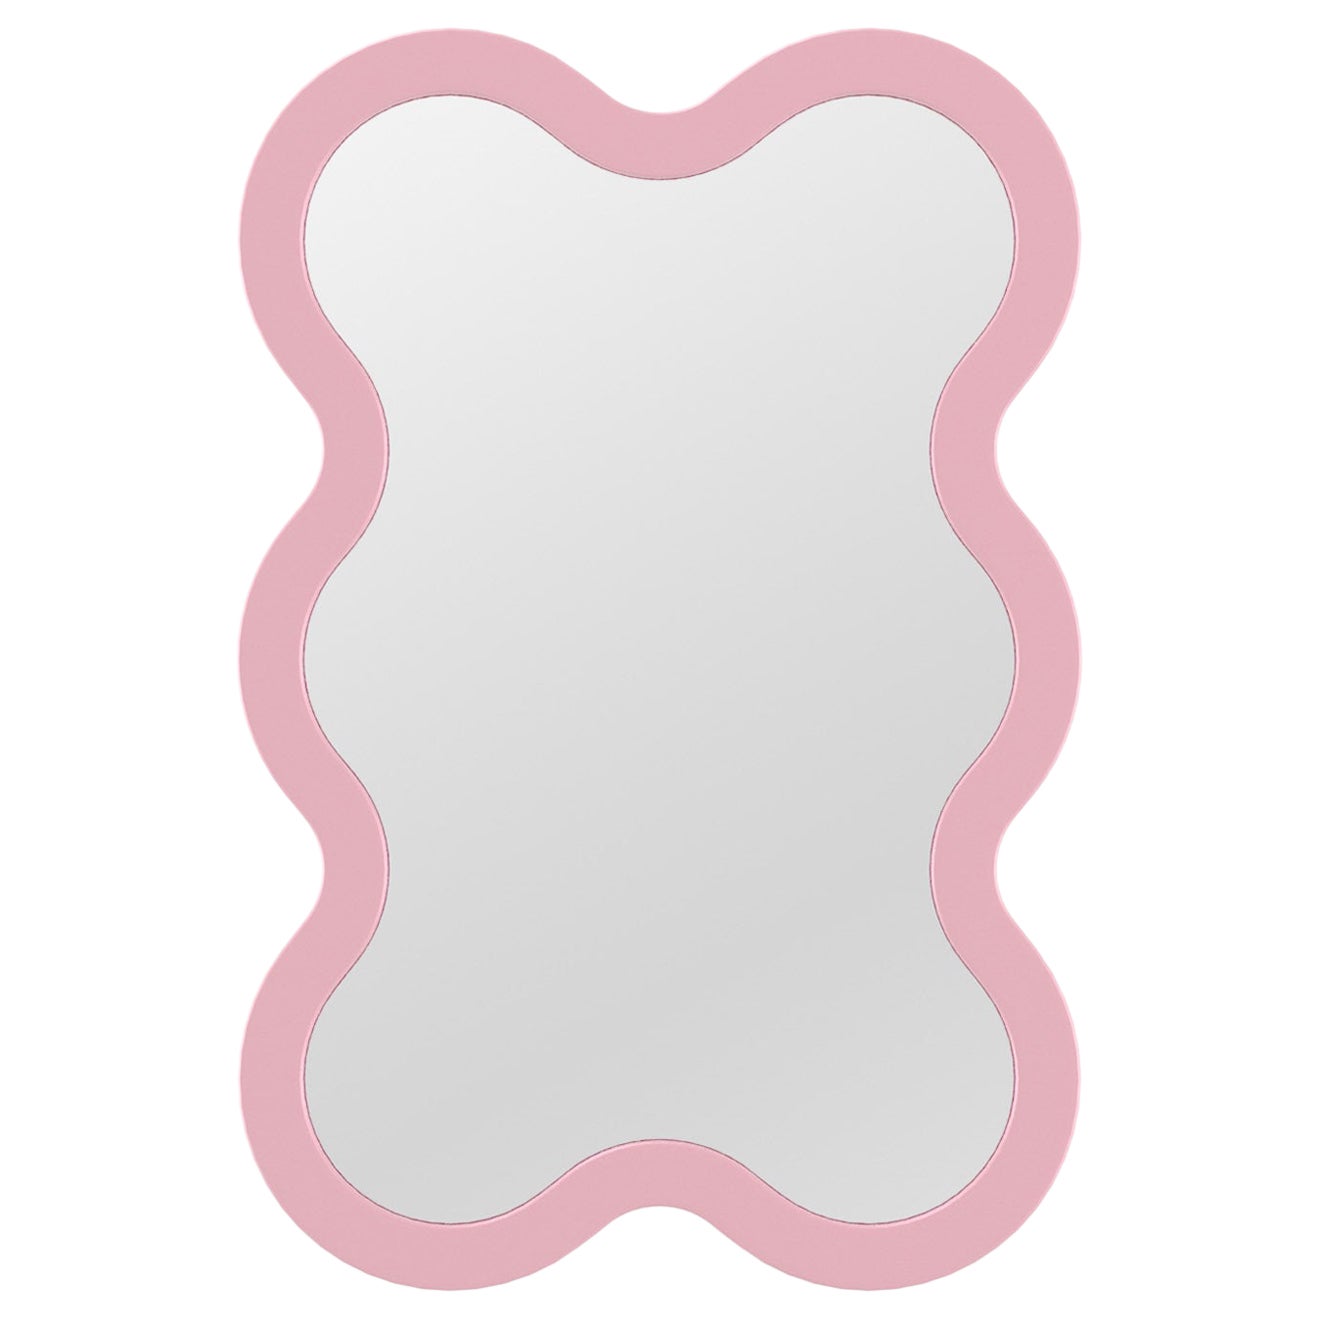 Contemporary Wall Mirror 'Hvyli 6' by Oitoproducts, Light Pink Frame For Sale